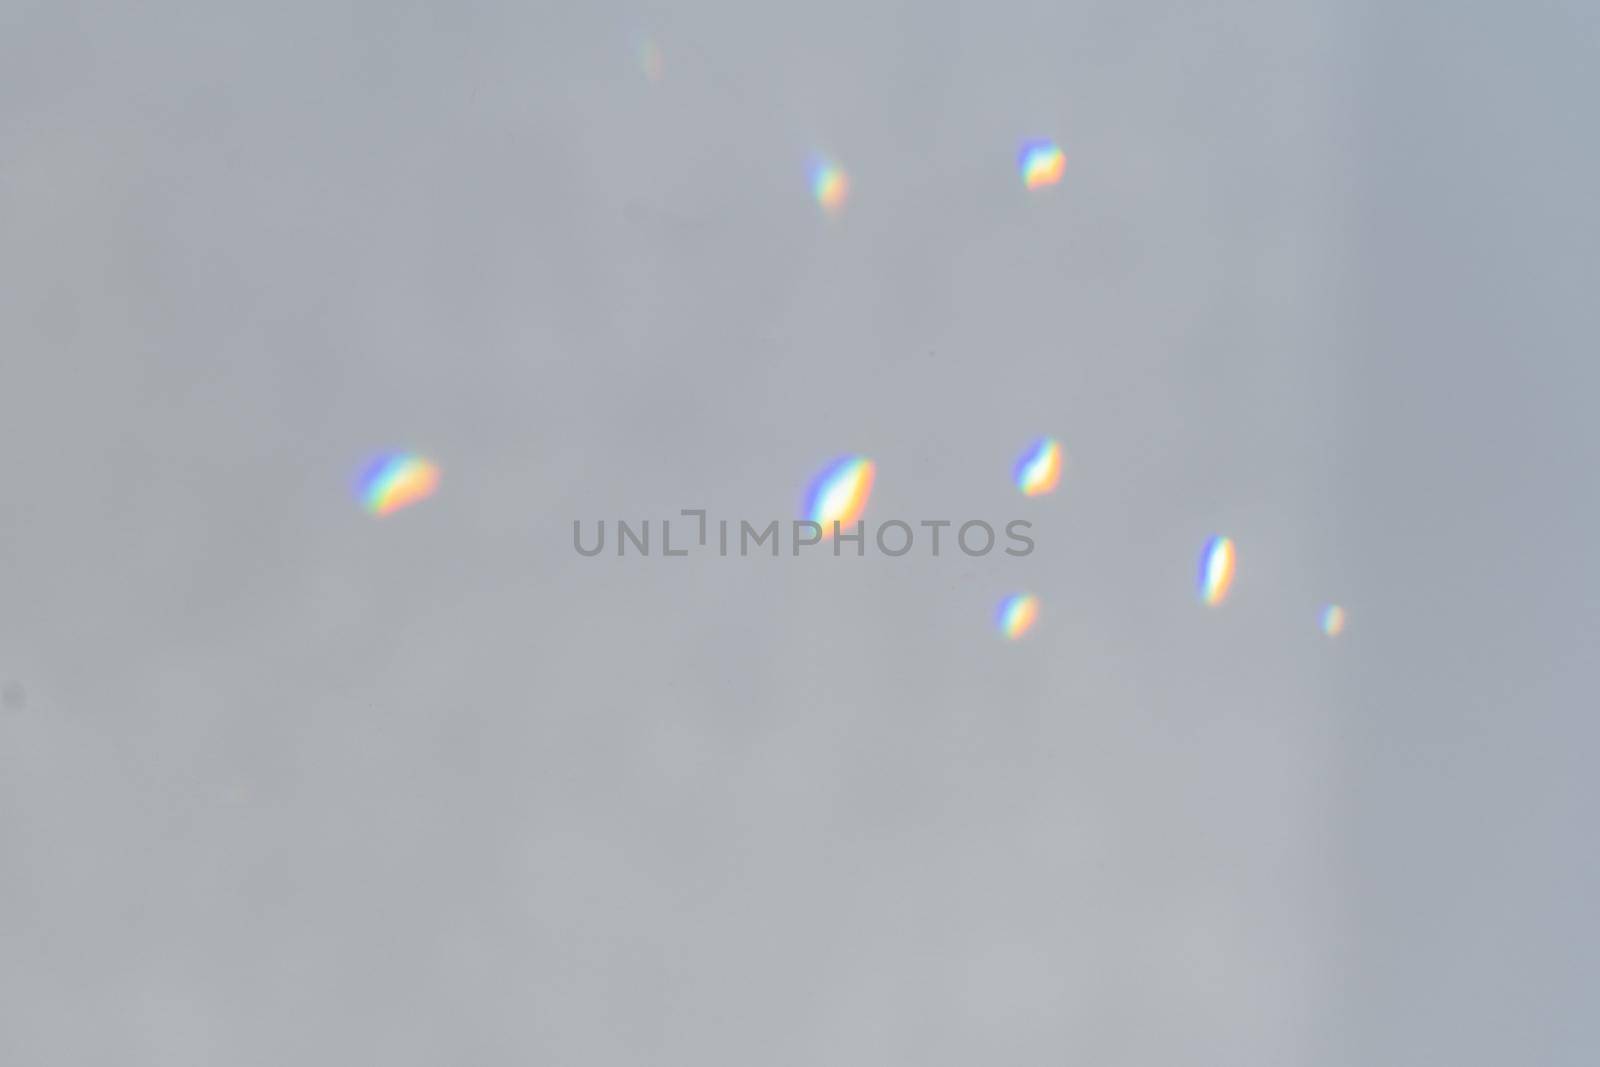 .Rainbow holographic shadow mock up, iridescent prismatic wallpaper. Abstract prism reflection, rays leaking through lens effect. Crystal light reflections for overlay mockup on light background.